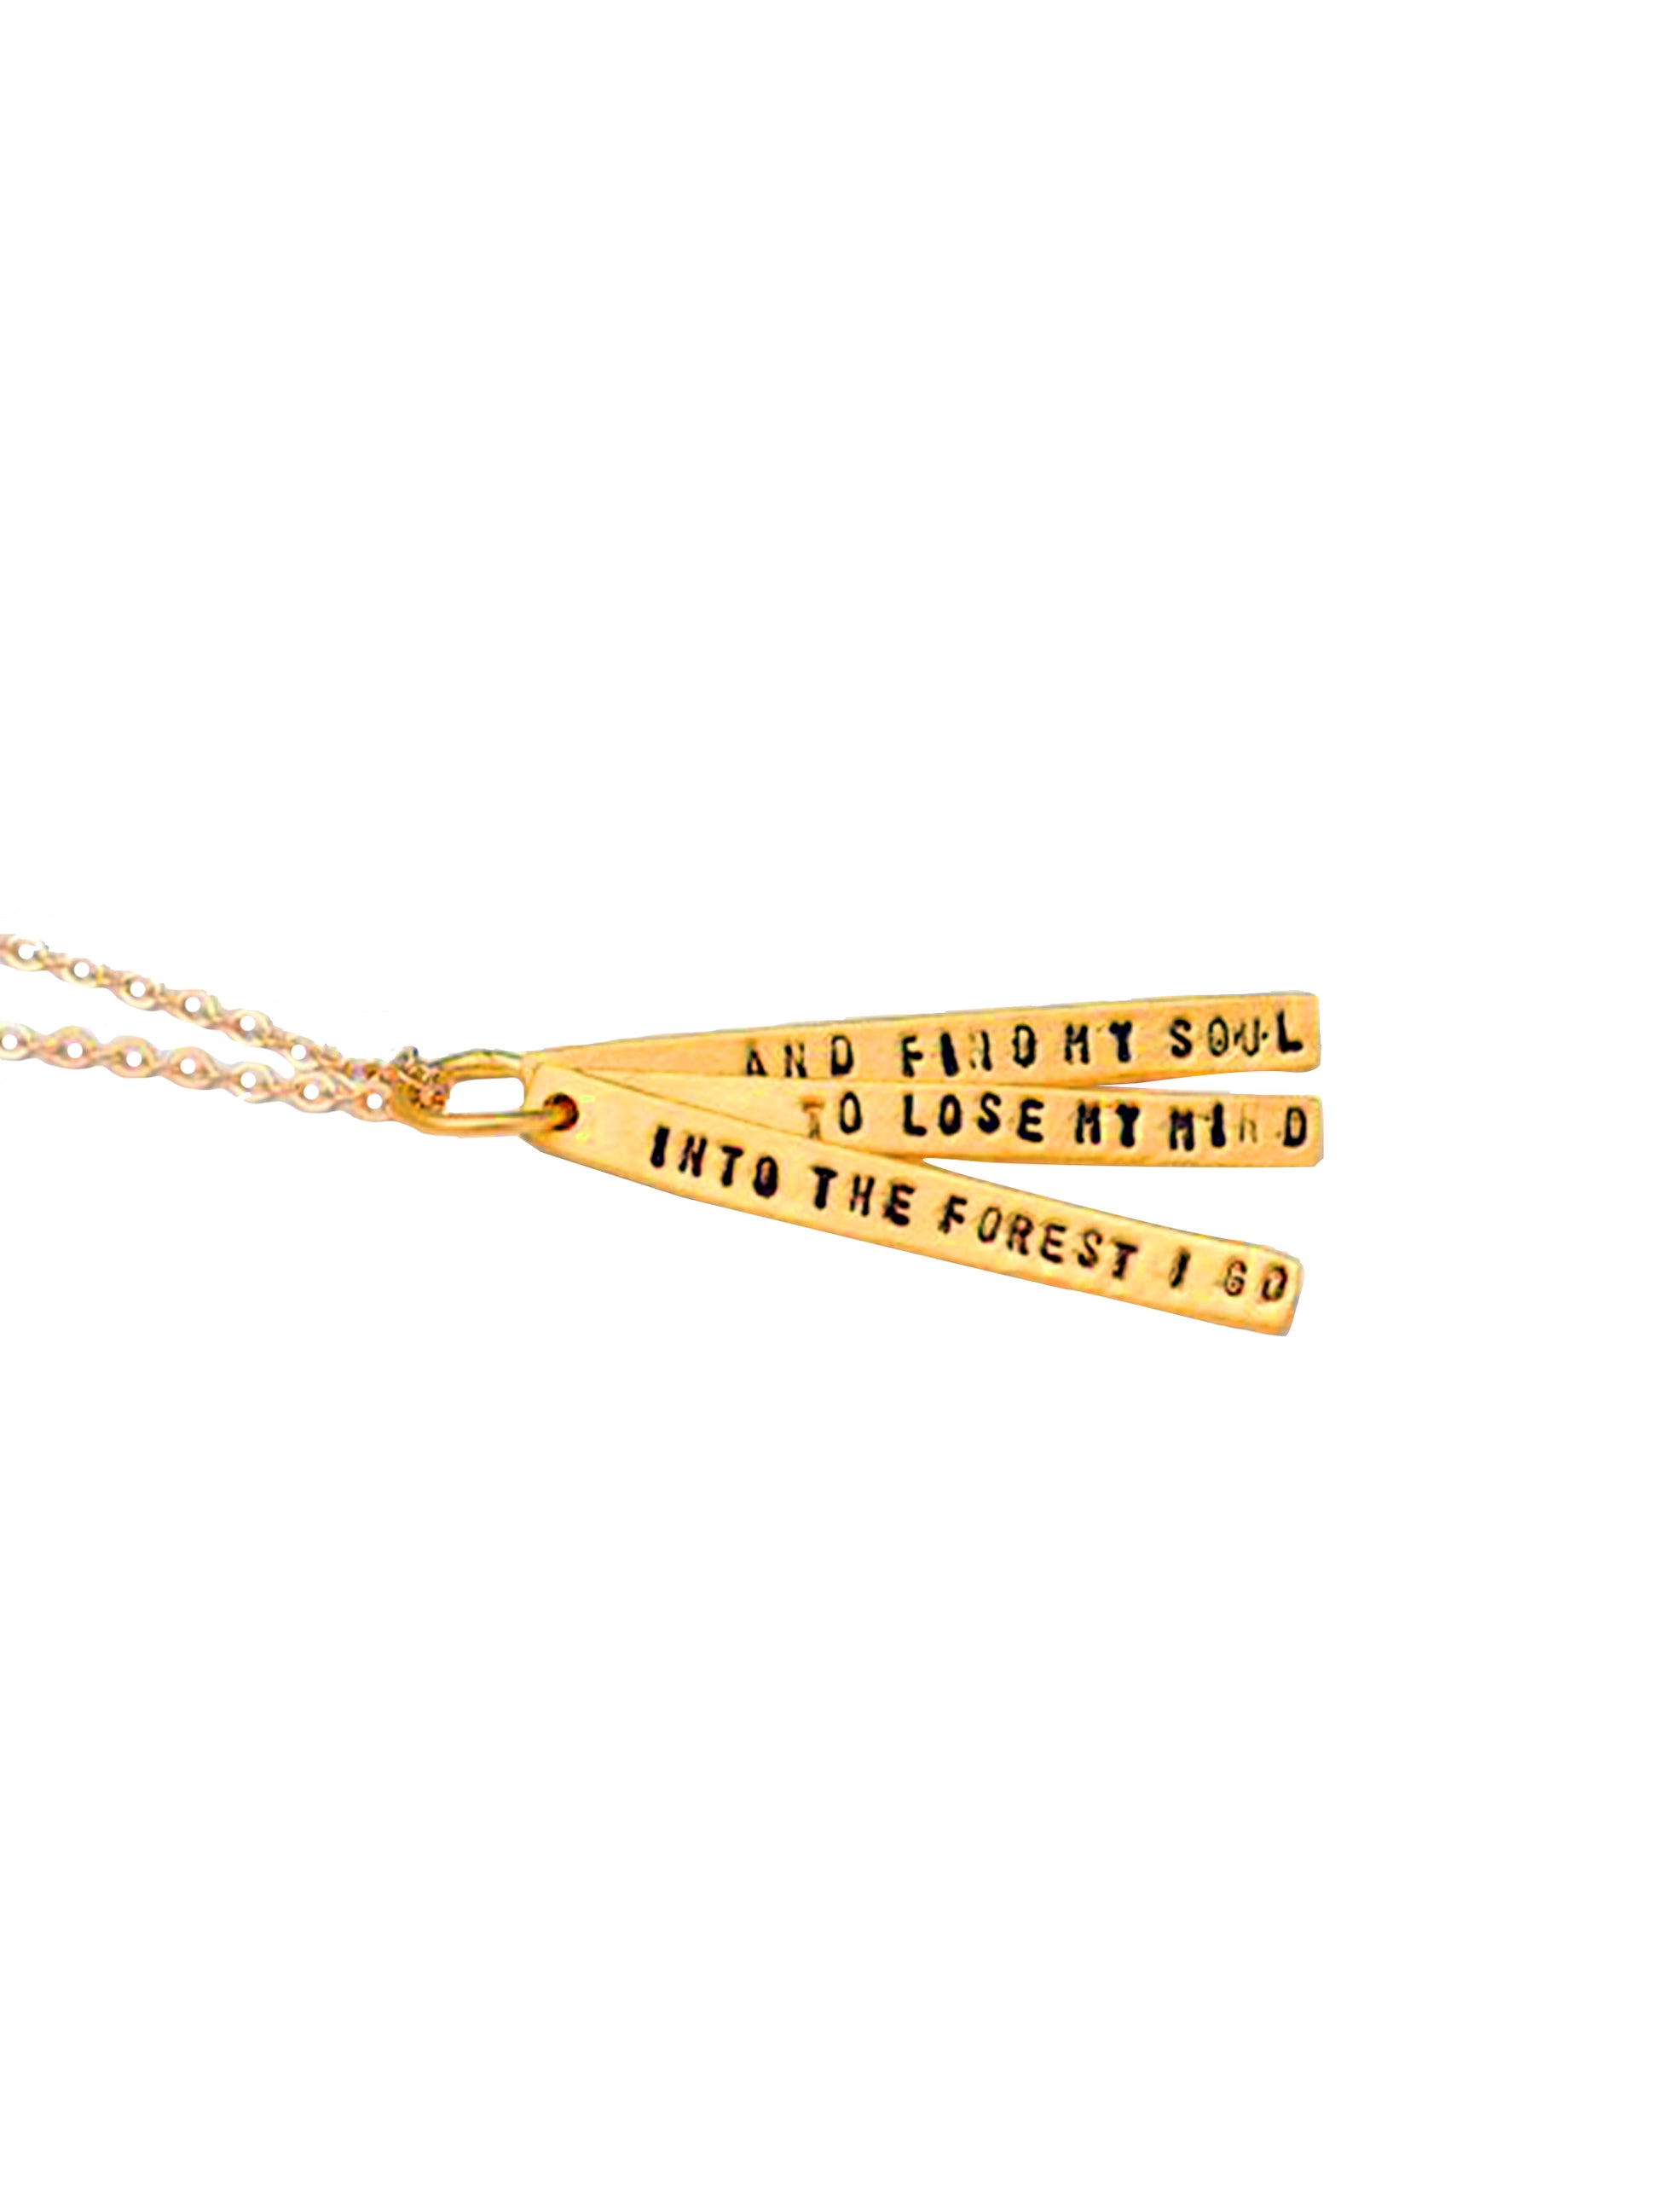 Chocolate & Steel Long-Bar Quote Necklace John Muir Into the Forest I Go Gold Weston Table